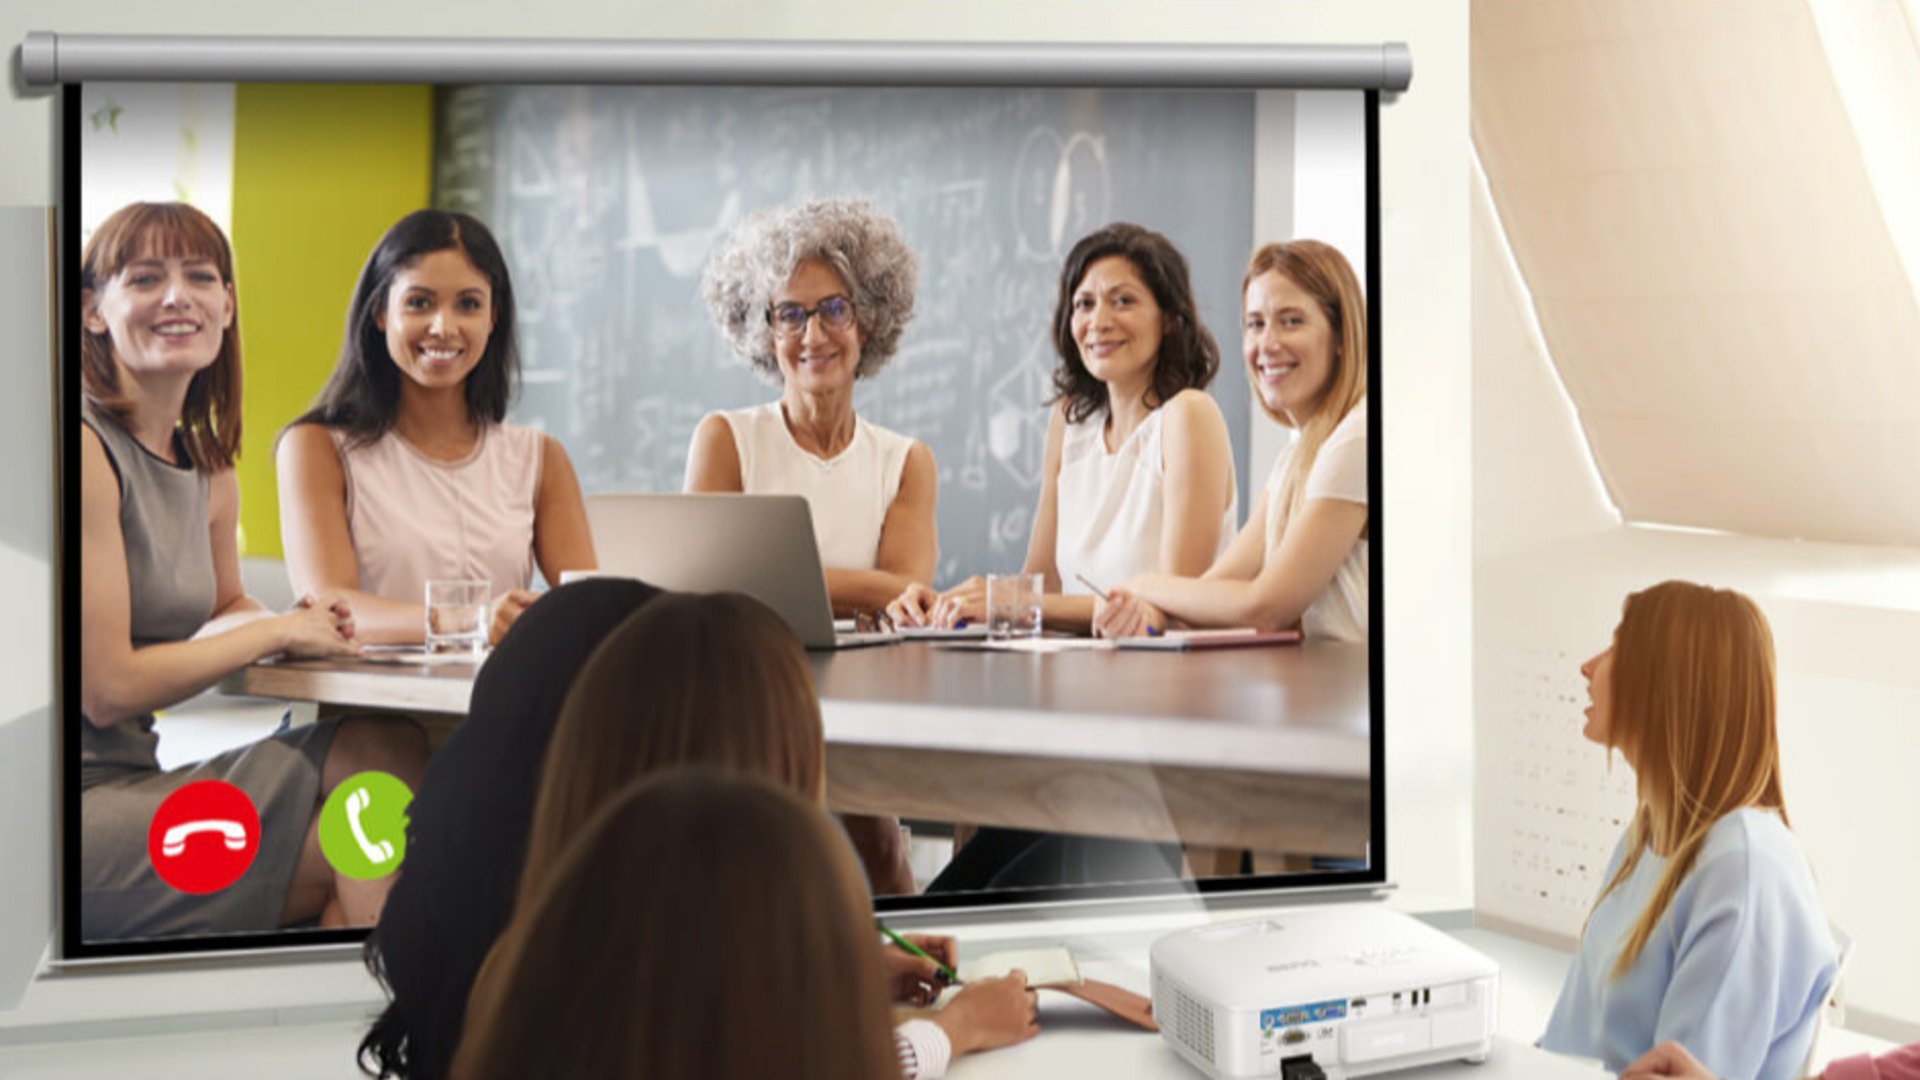 Start a video conference anytime.Get connected with just one click